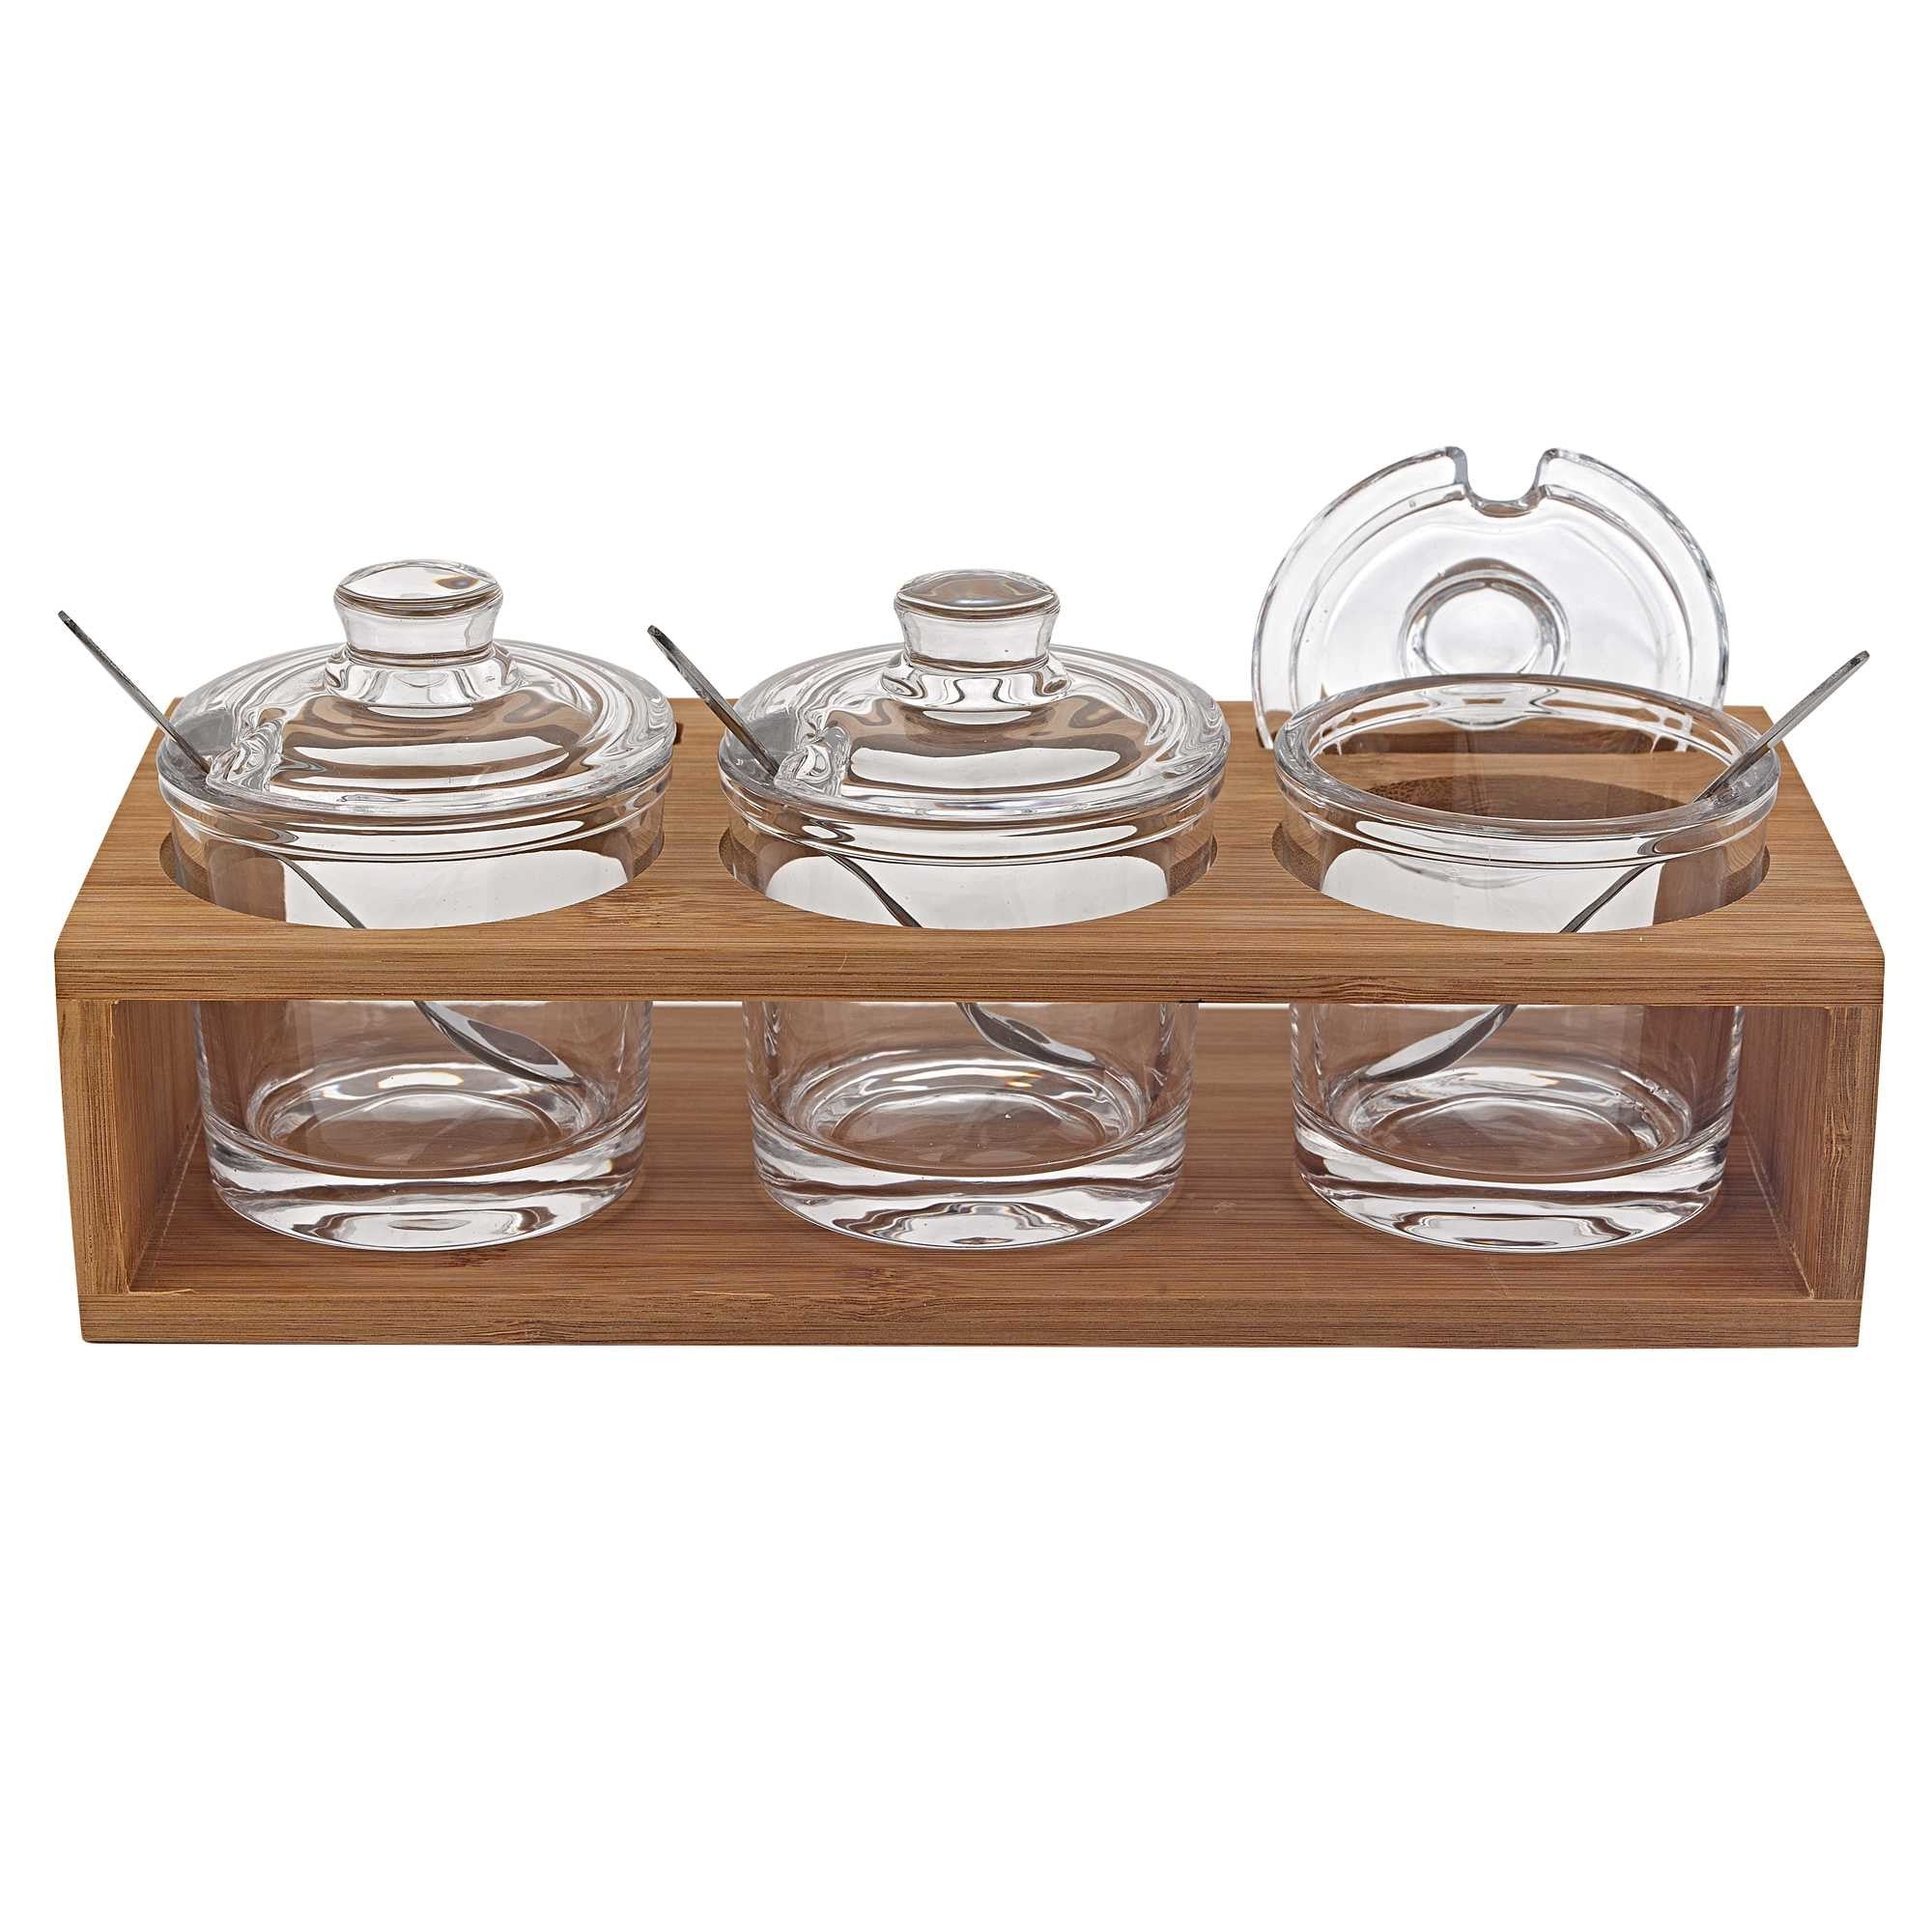 6 Mouth Blown Crystal Jam Set With 3 Glass Jars And Spoons On A Wood Stand